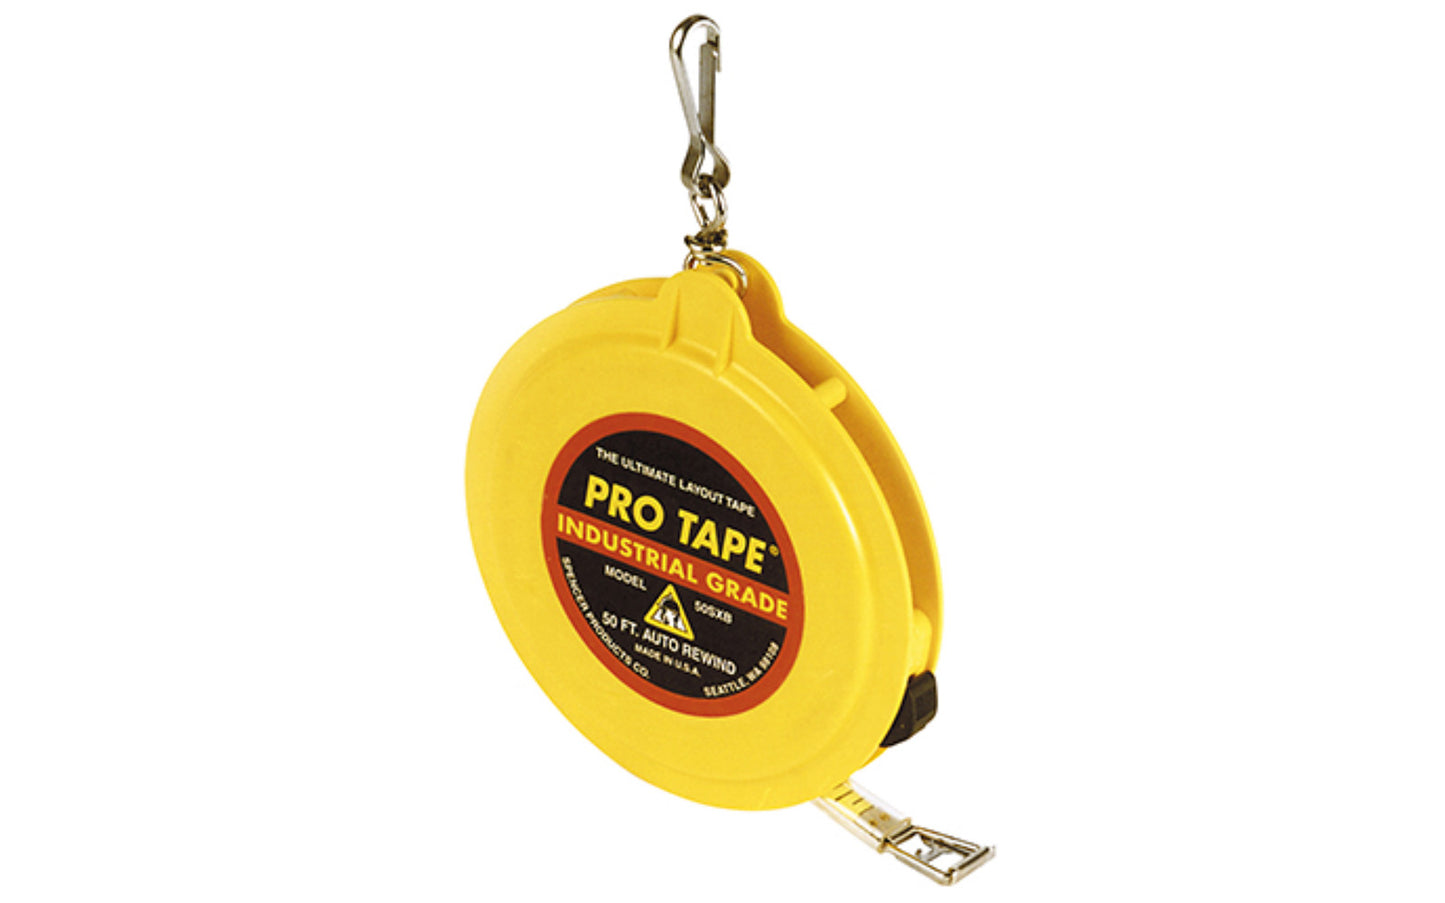 3/8" x 50' Spencer Pro-Tape Auto-Rewind Tape Measure - 50SXB. The case is made of tough ABS plastic. 1/8" graduations. Spencer ProTapes are designed with an alloy steel main shaft, & active bumper to cushion blade tip on rewind. Other features include a locking brake, folding engineers hook, & a belt clip. Made in USA.